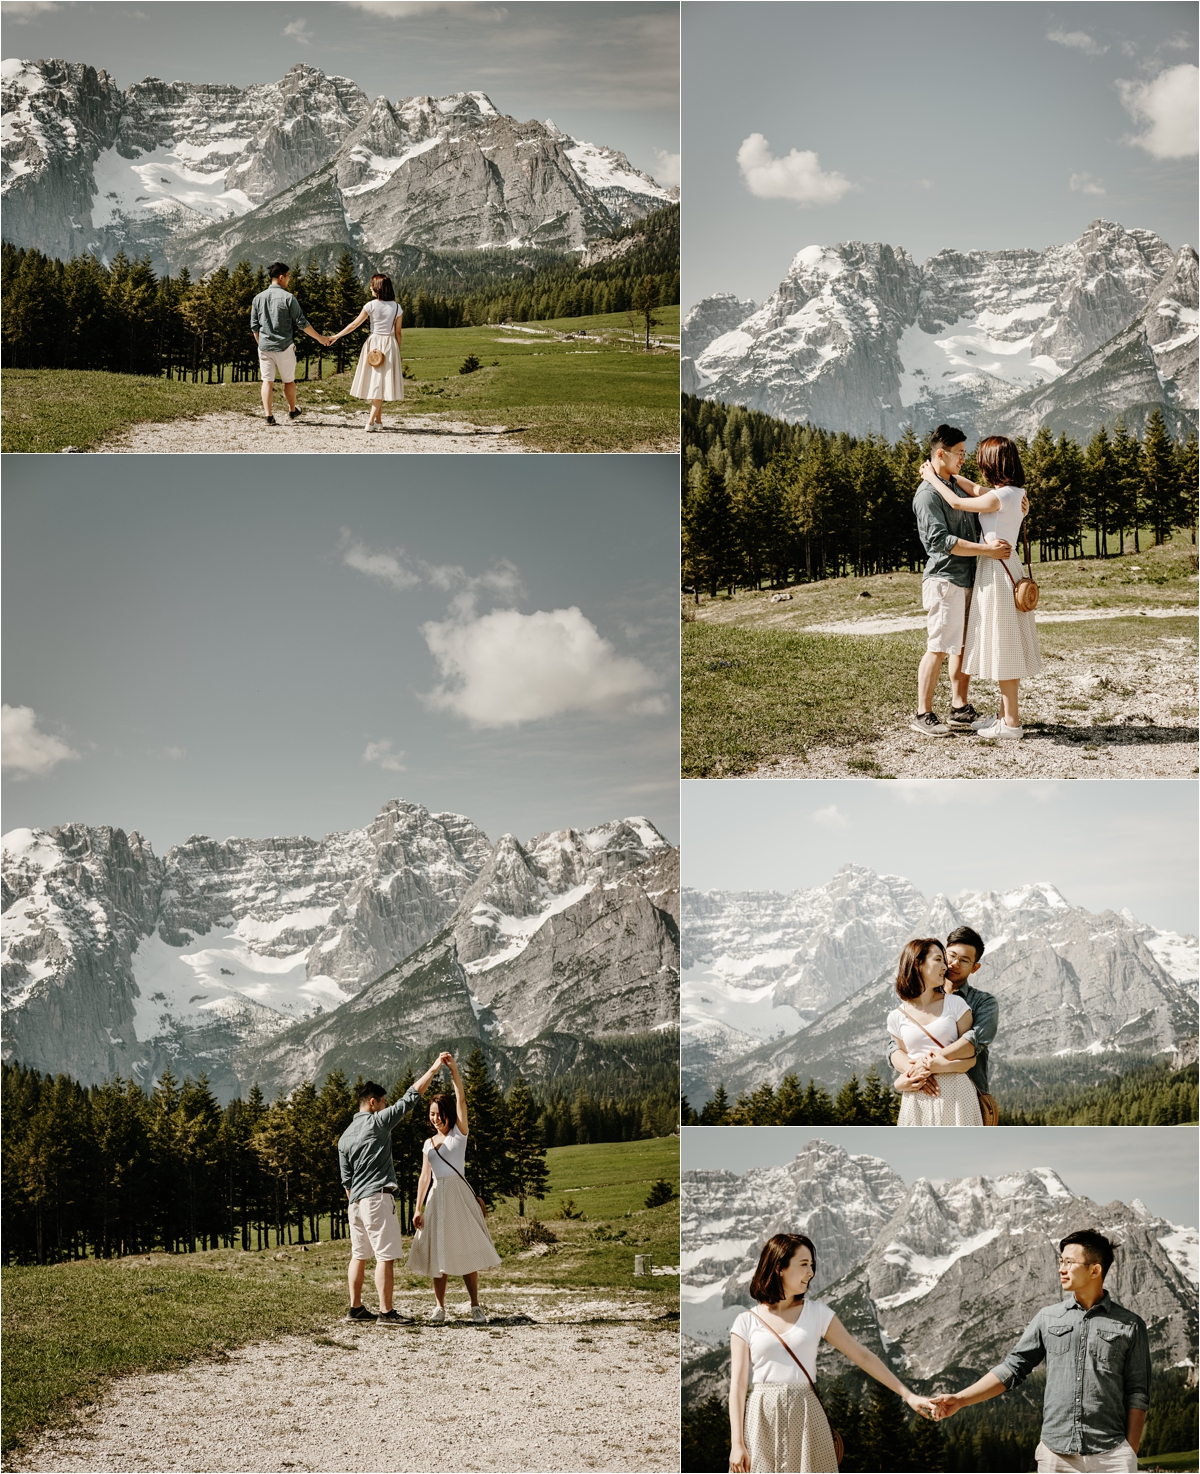 Exploring the footpaths around Lago Misurina in the Italian Alps. Photo by Wild Connections Photography Dolomites Wedding Photographer